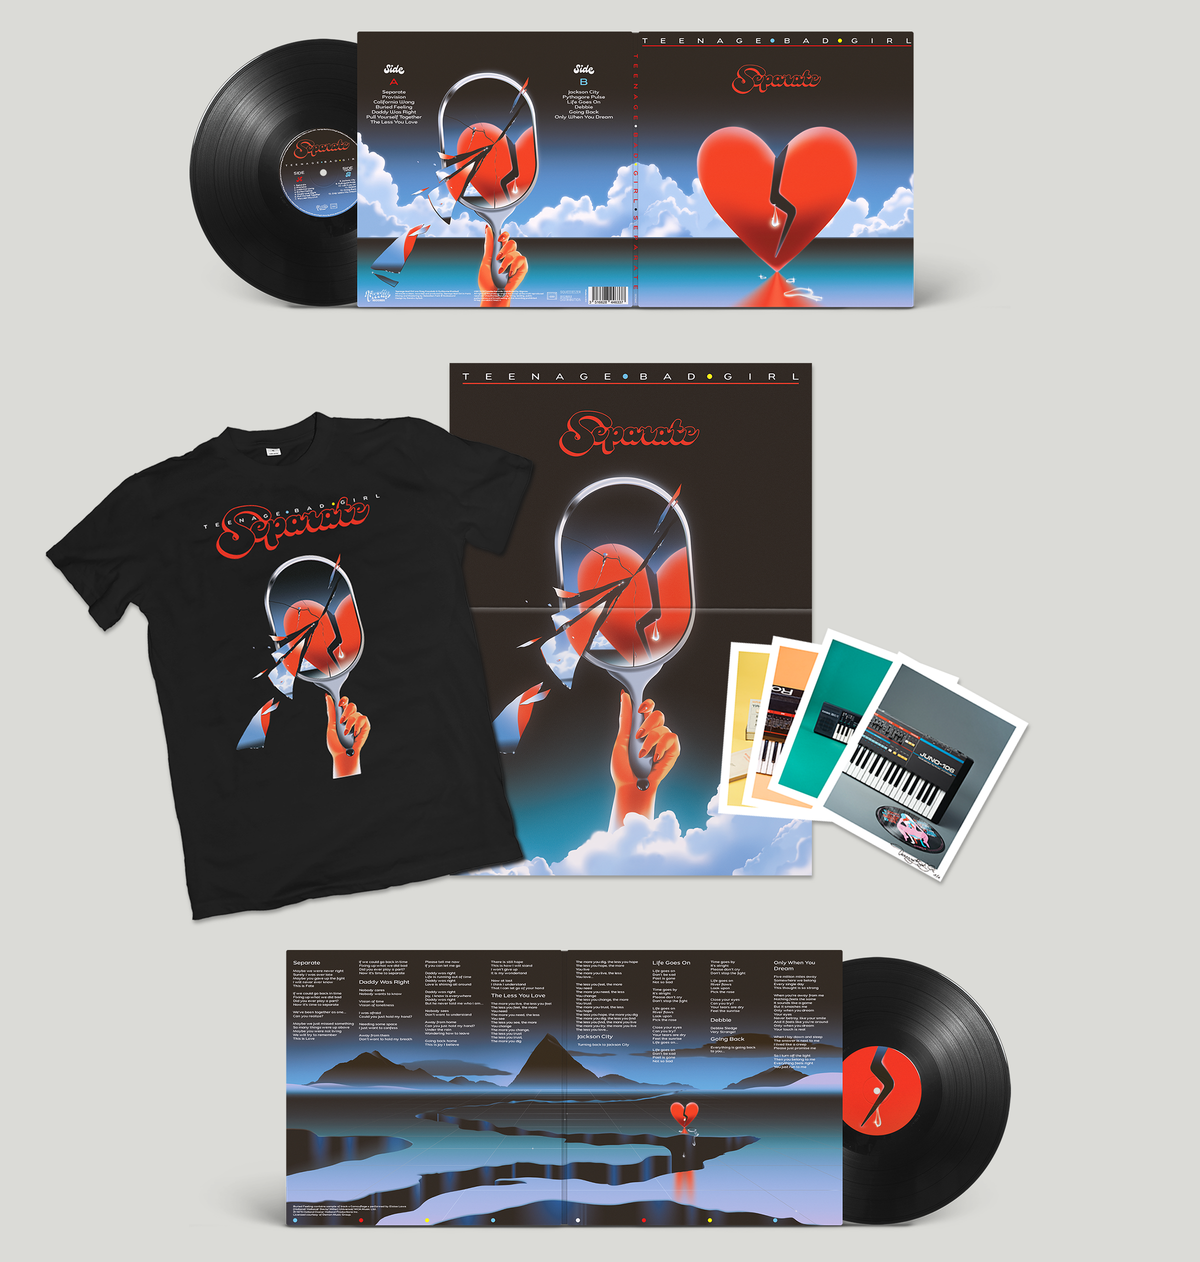 Pack Collector "Separate" - Limited Vinyl Edition" + T-Shirt Exclusif